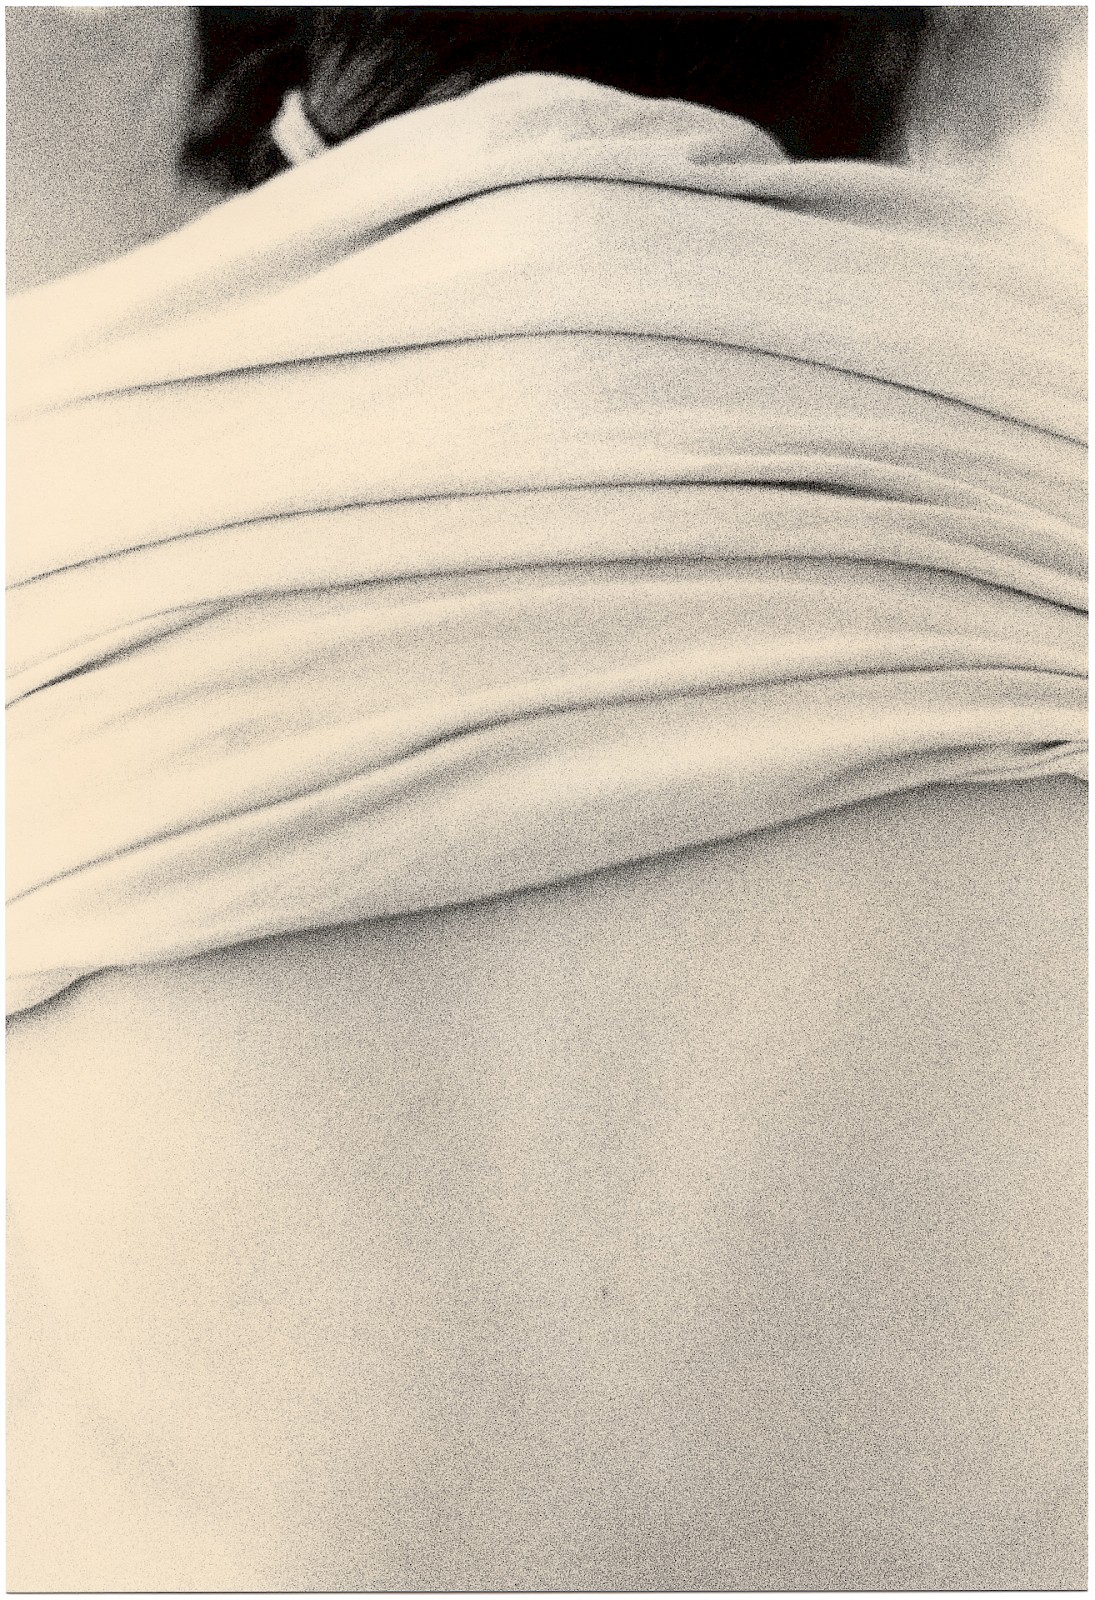 Untitled (back), silver gelatin photograph by Mikael Siirilä